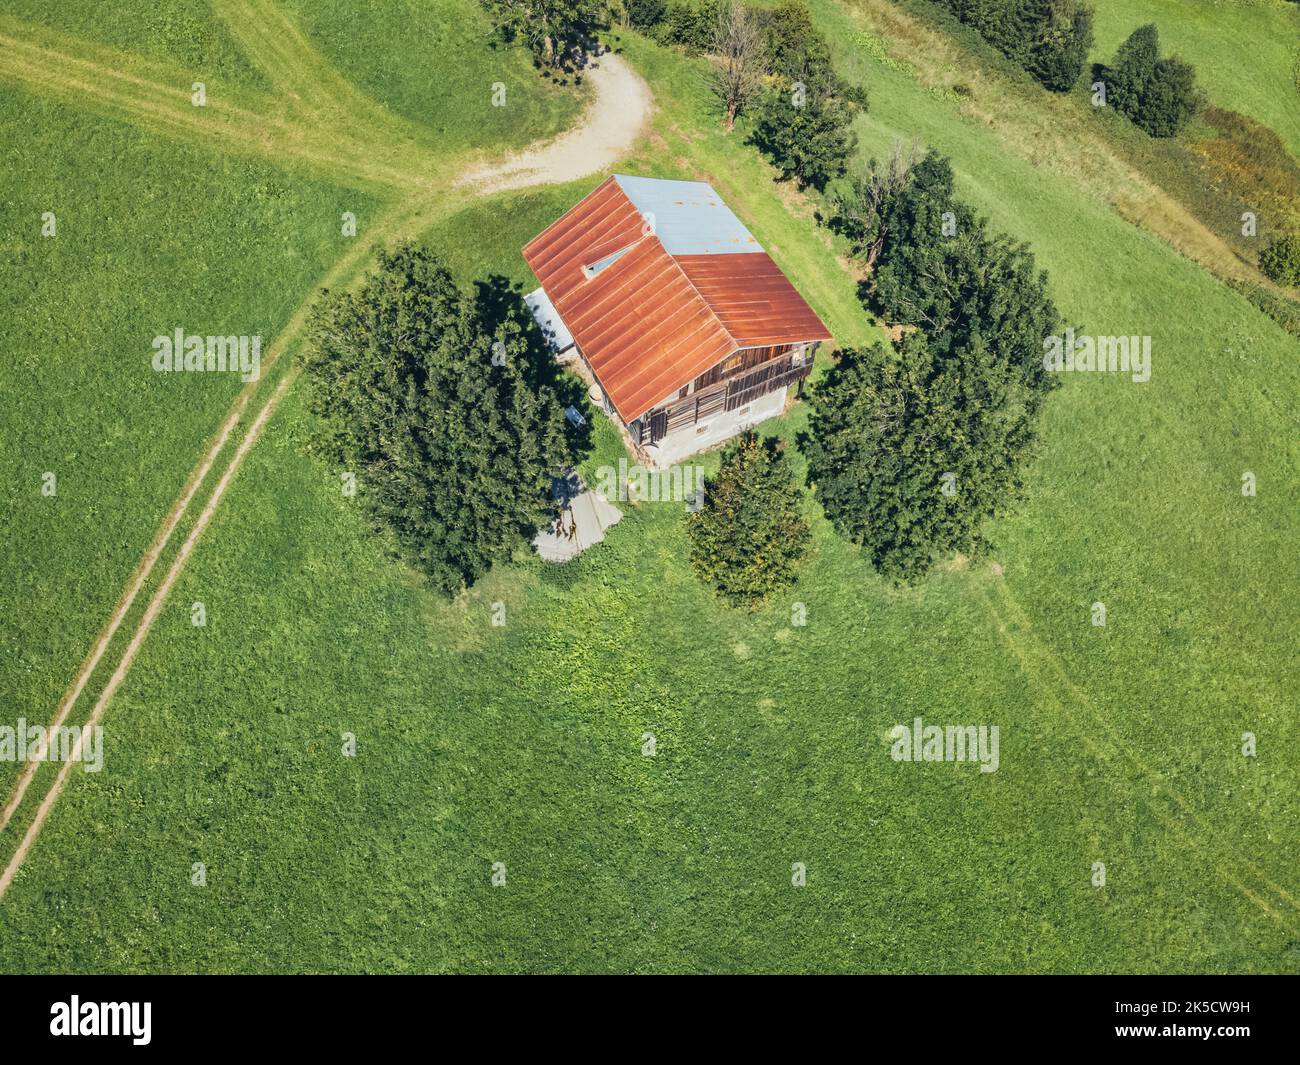 Italy, Veneto, province of Belluno, Santo Stefano di Cadore, Campolongo. Rural building, trees and well-kept green lawn, elevated view Stock Photo